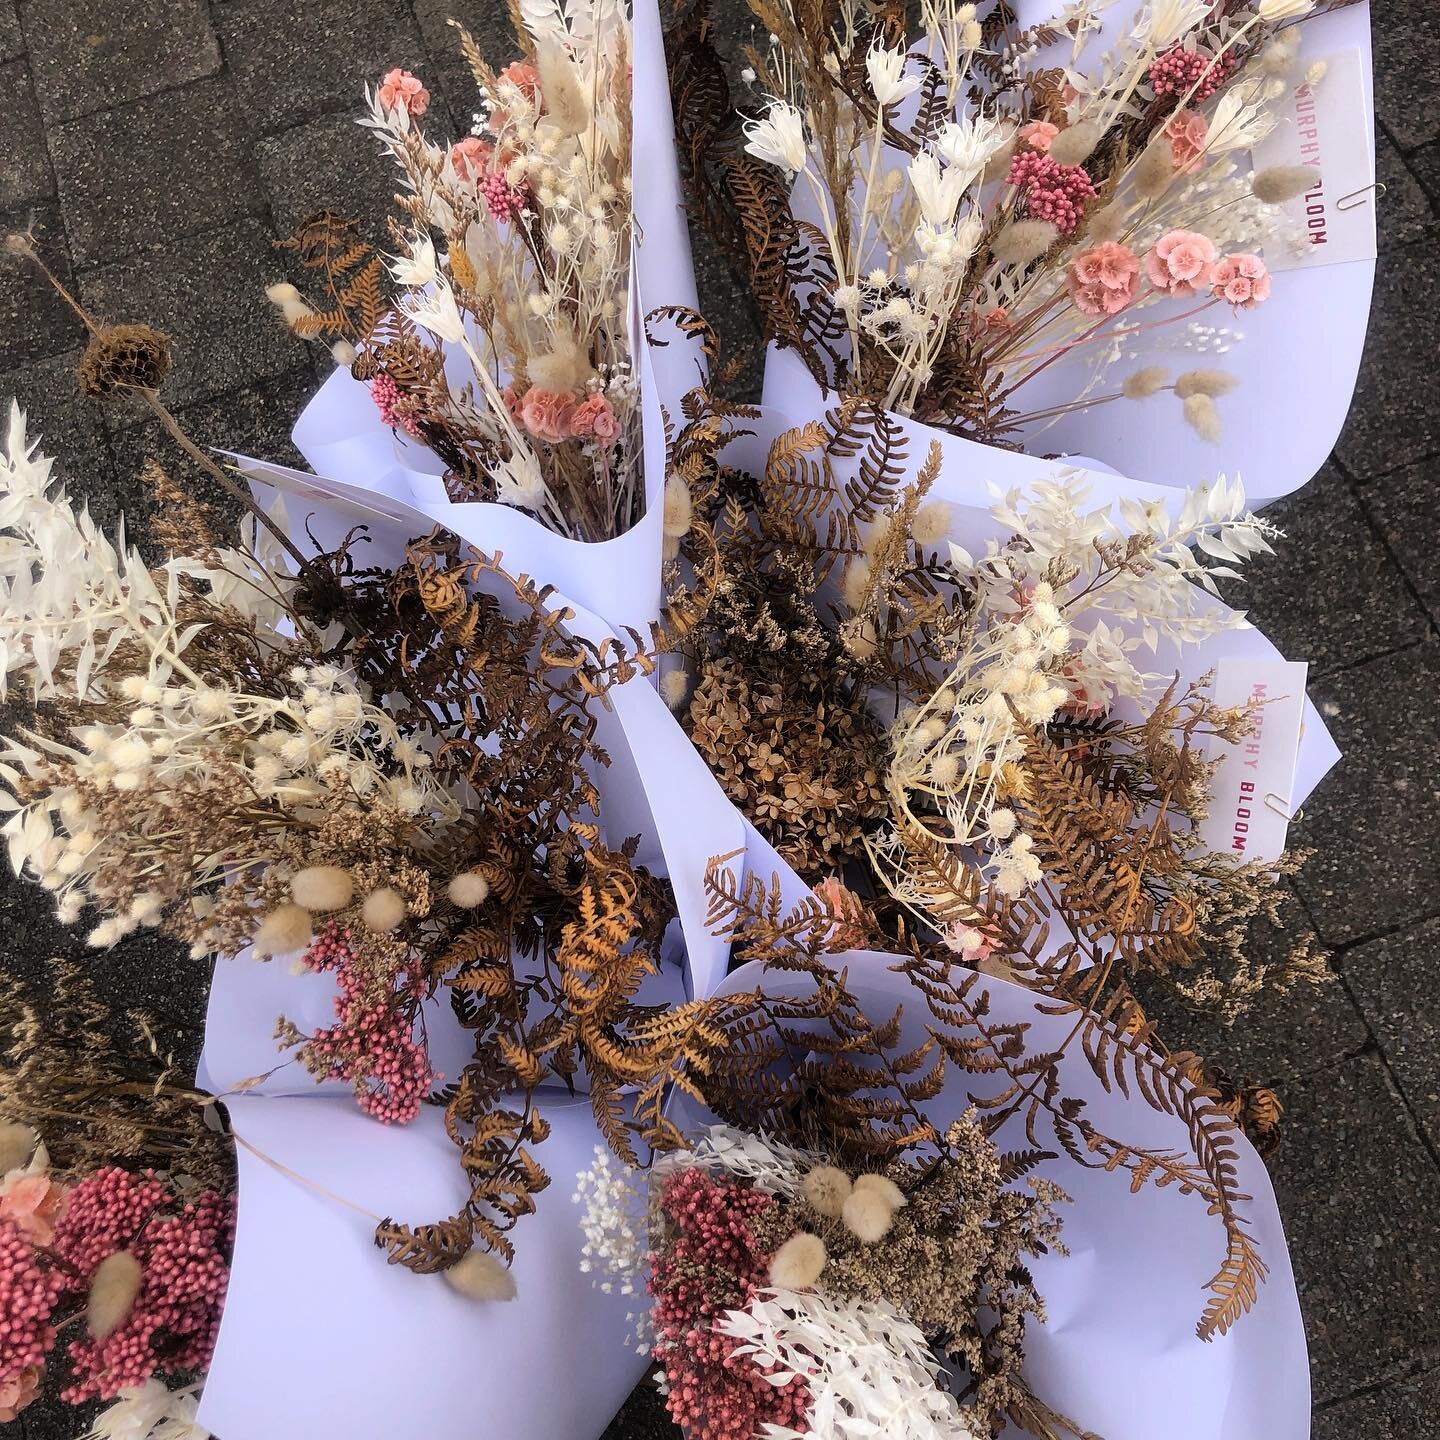 Grab a bespoke MB dried bunch of blooms from @hopeandme today.
Go on, treat yo self 🌸